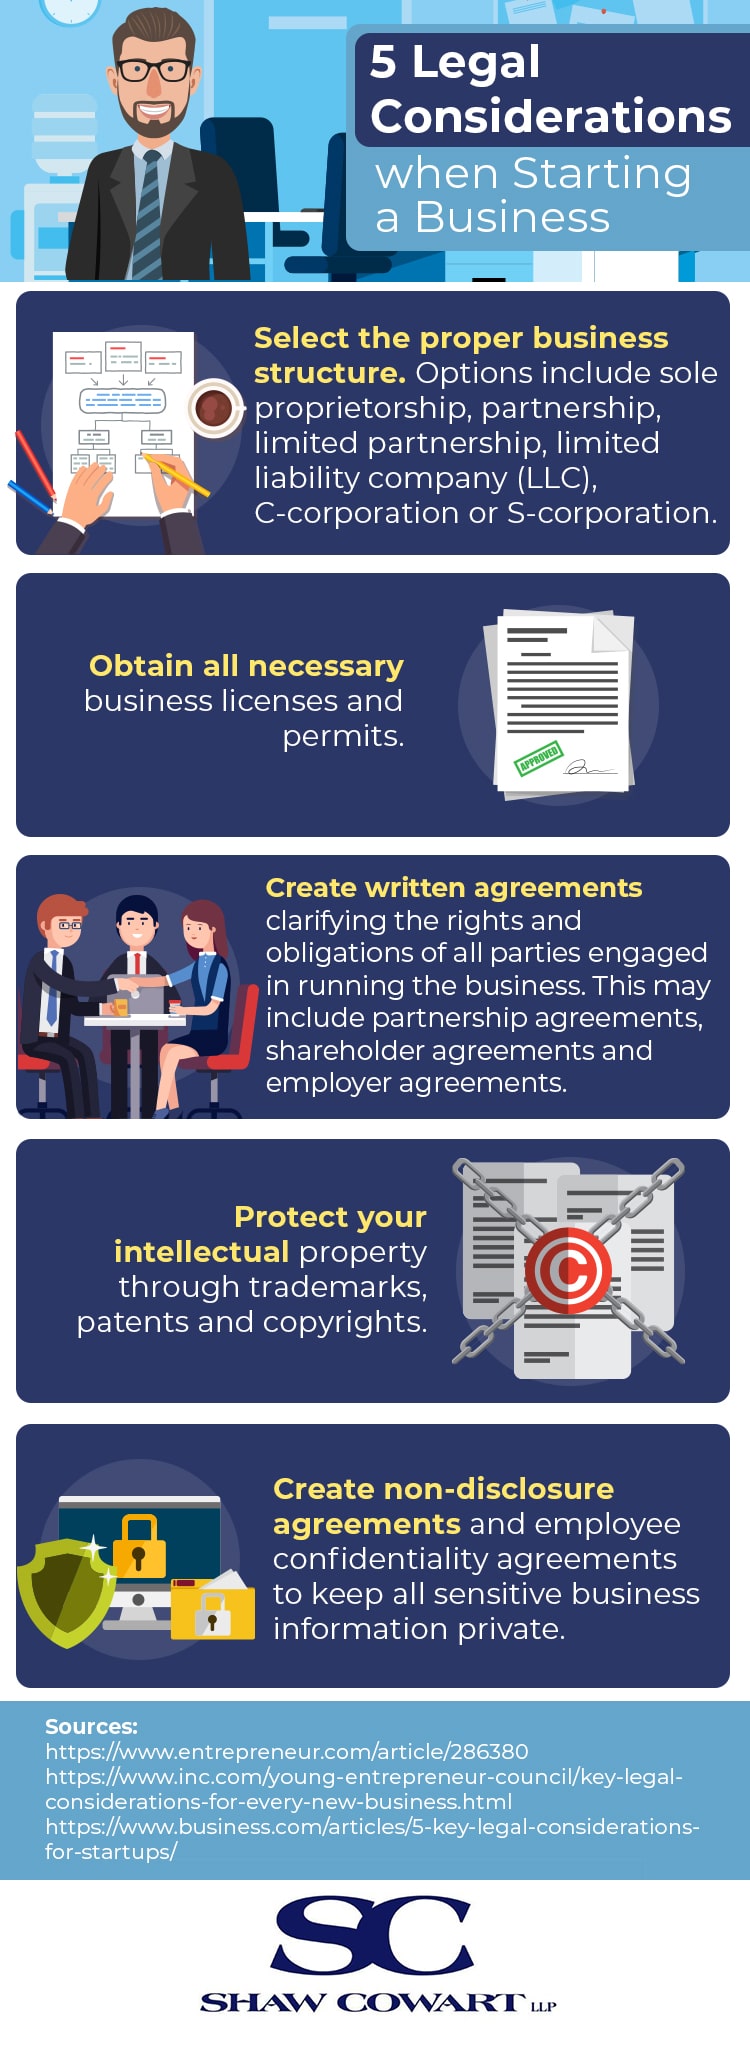 infographic highlighting 5 legal considerations when starting a business